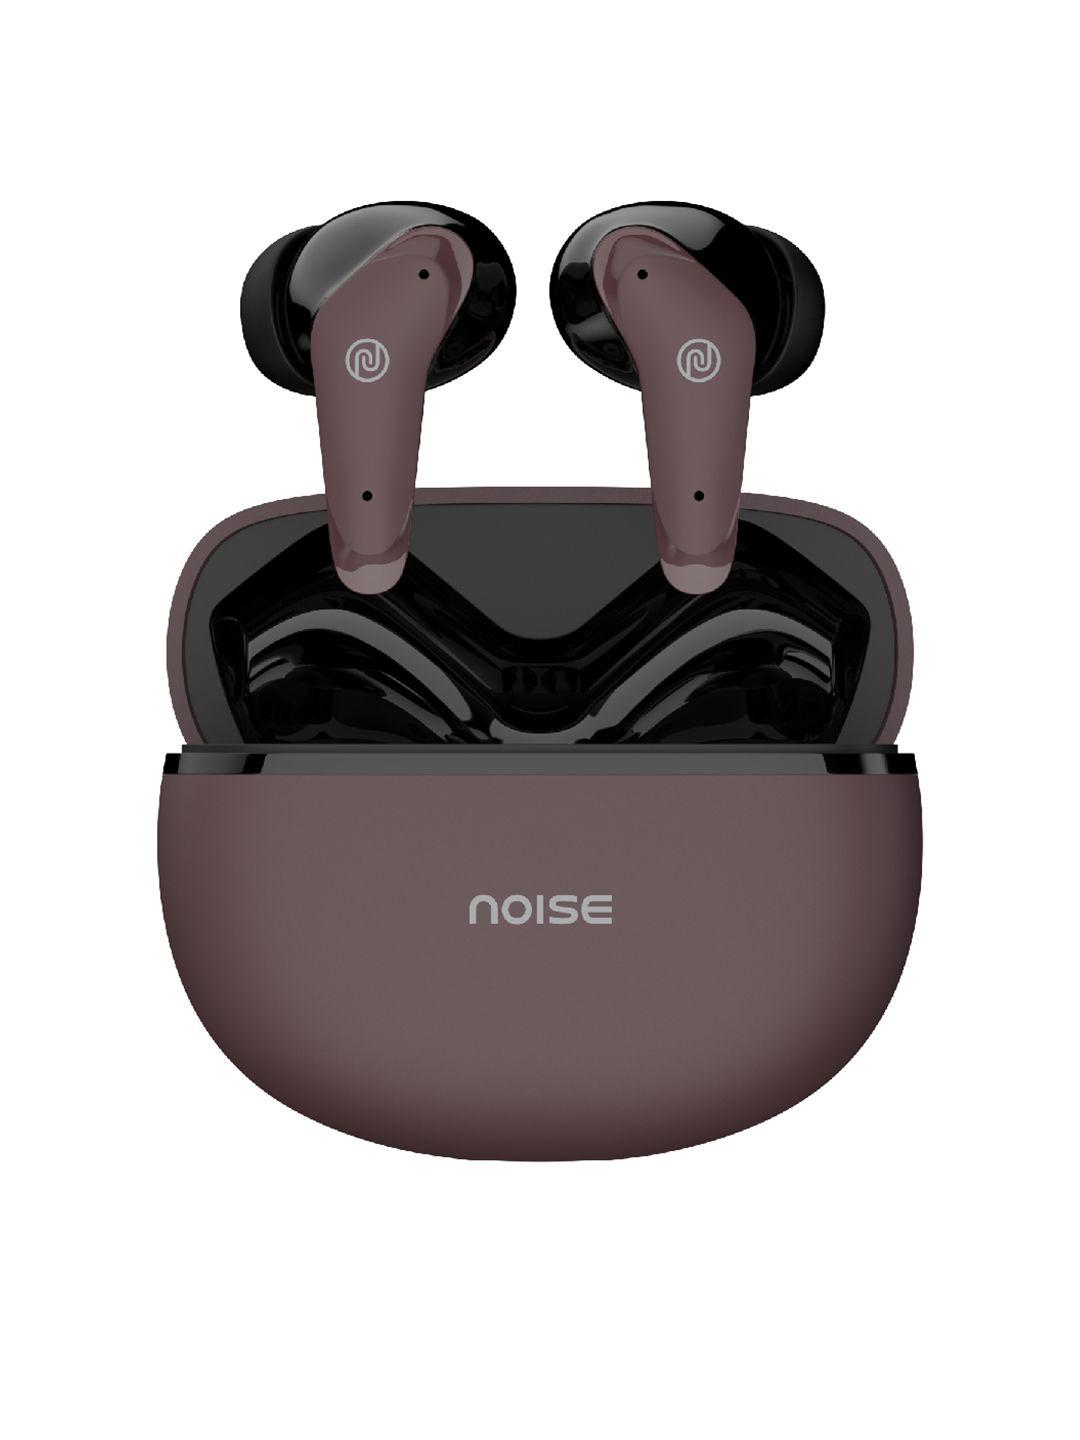 noise-buds-vs102-plus-truly-wireless-earbuds-with-70hrs-playtime